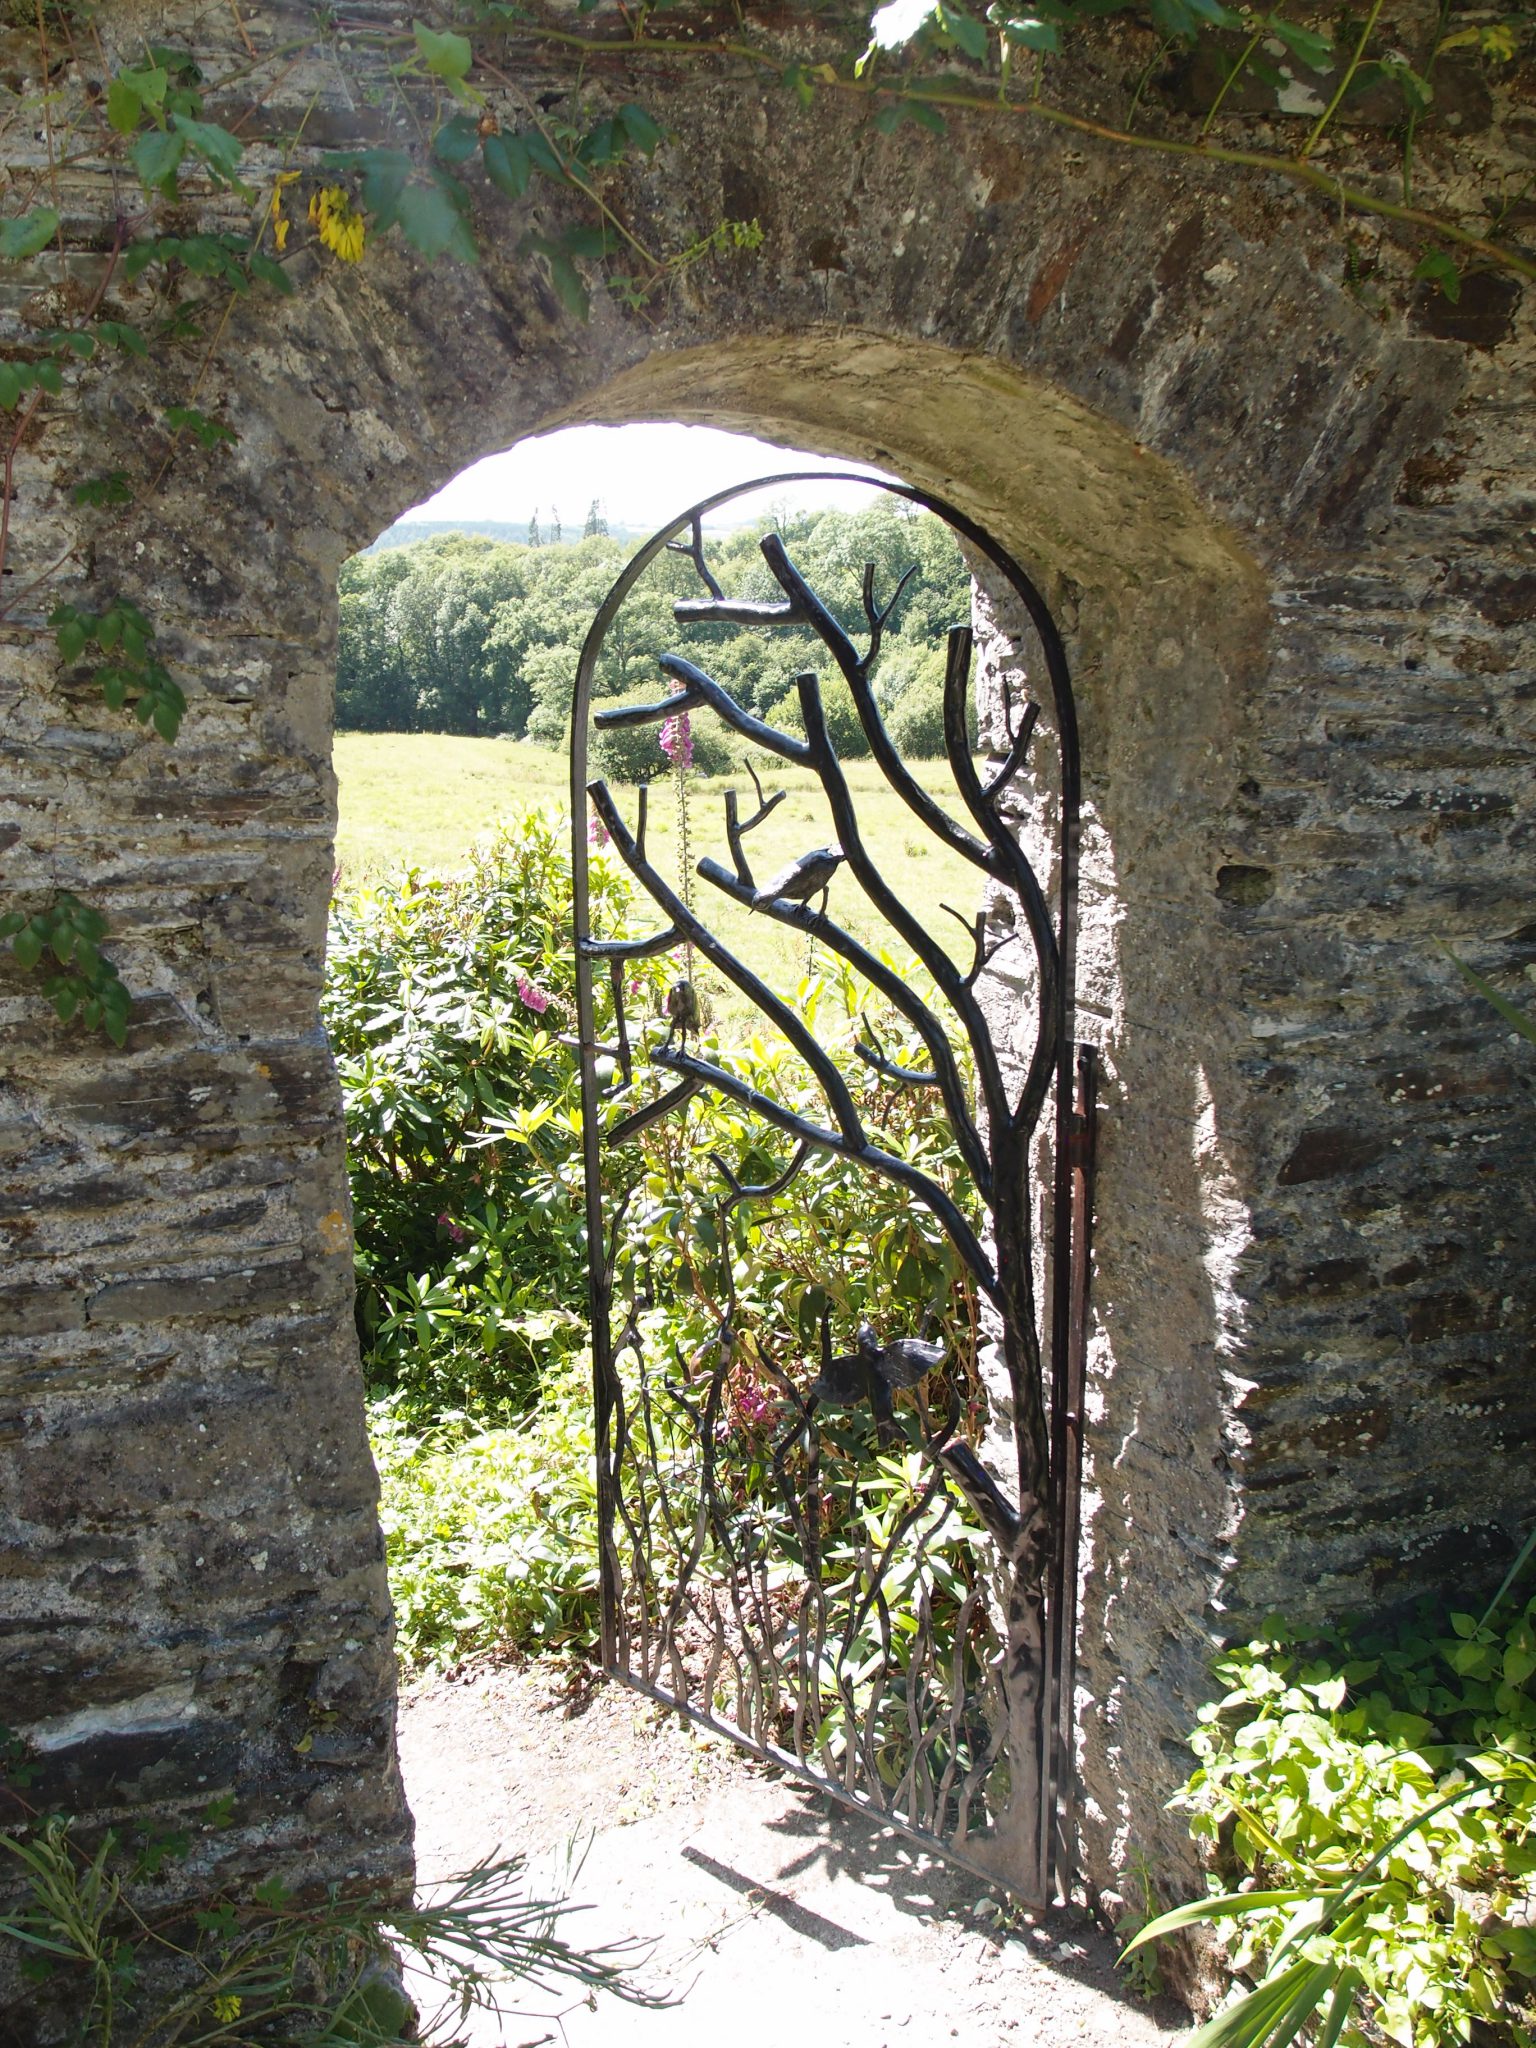 This gate separates the Cider House Garden and the Wild Garden